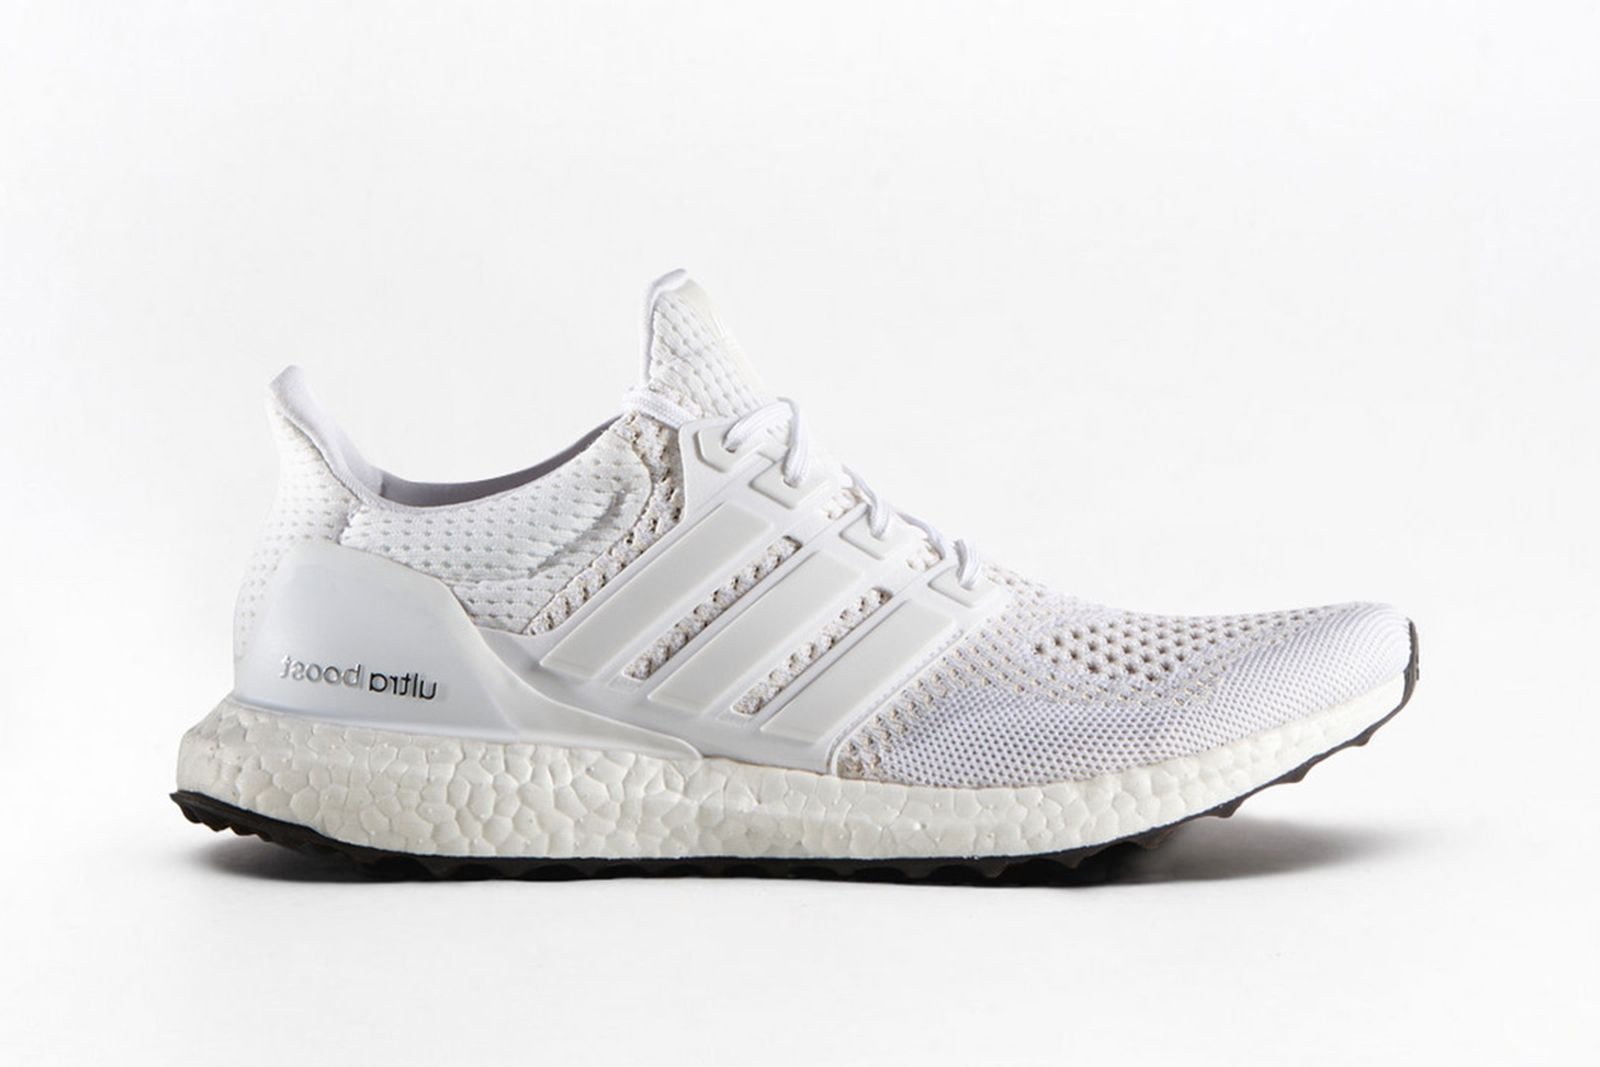 Adidas Ultraboost 1 0 Triple White Official Images Restock Info